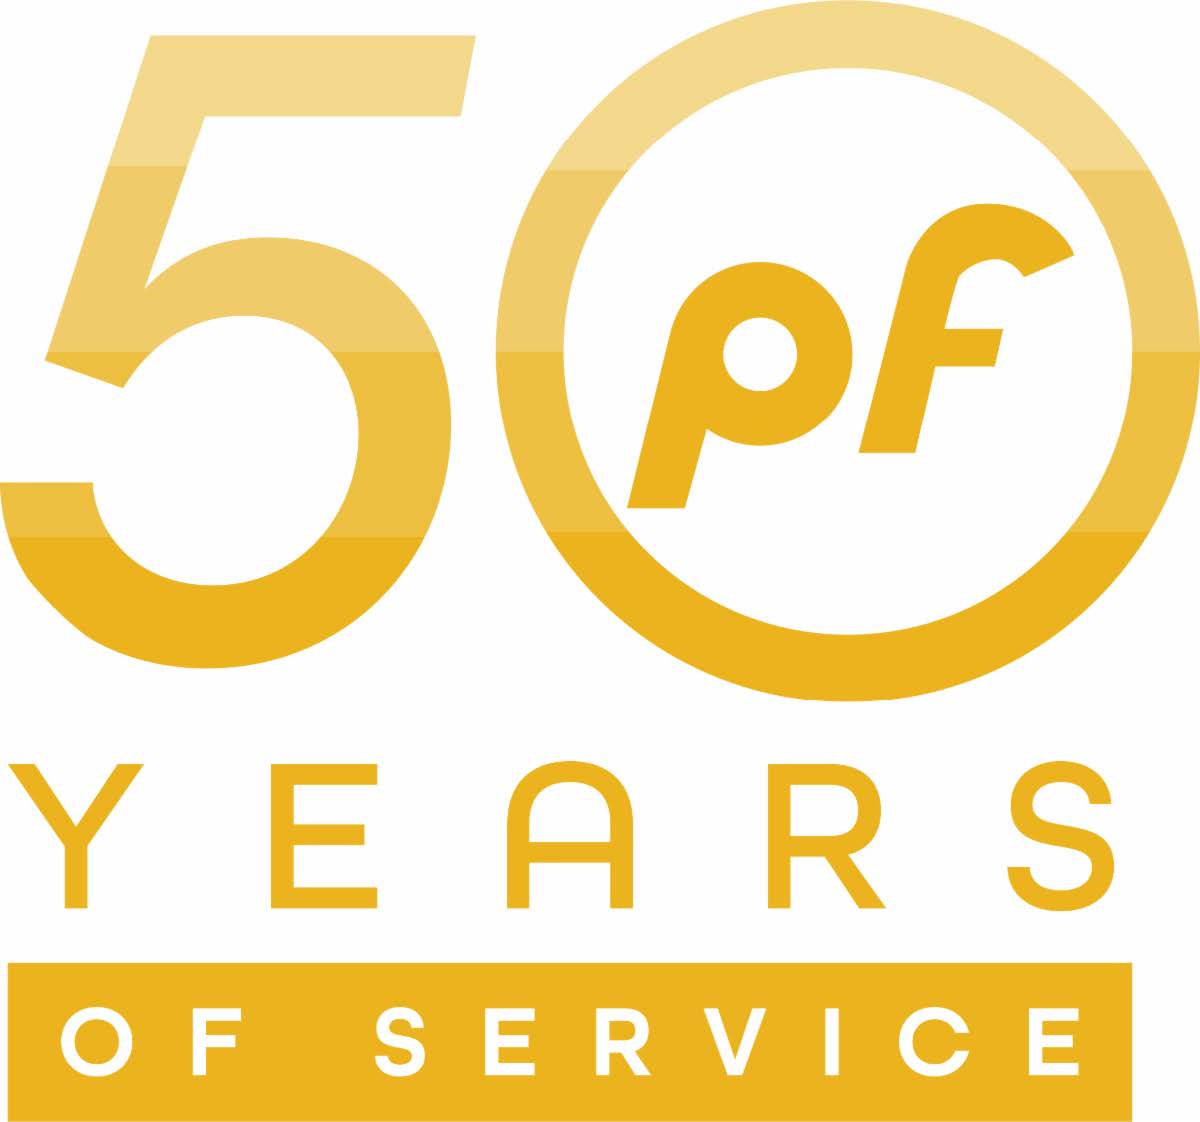 50 Years Of Service